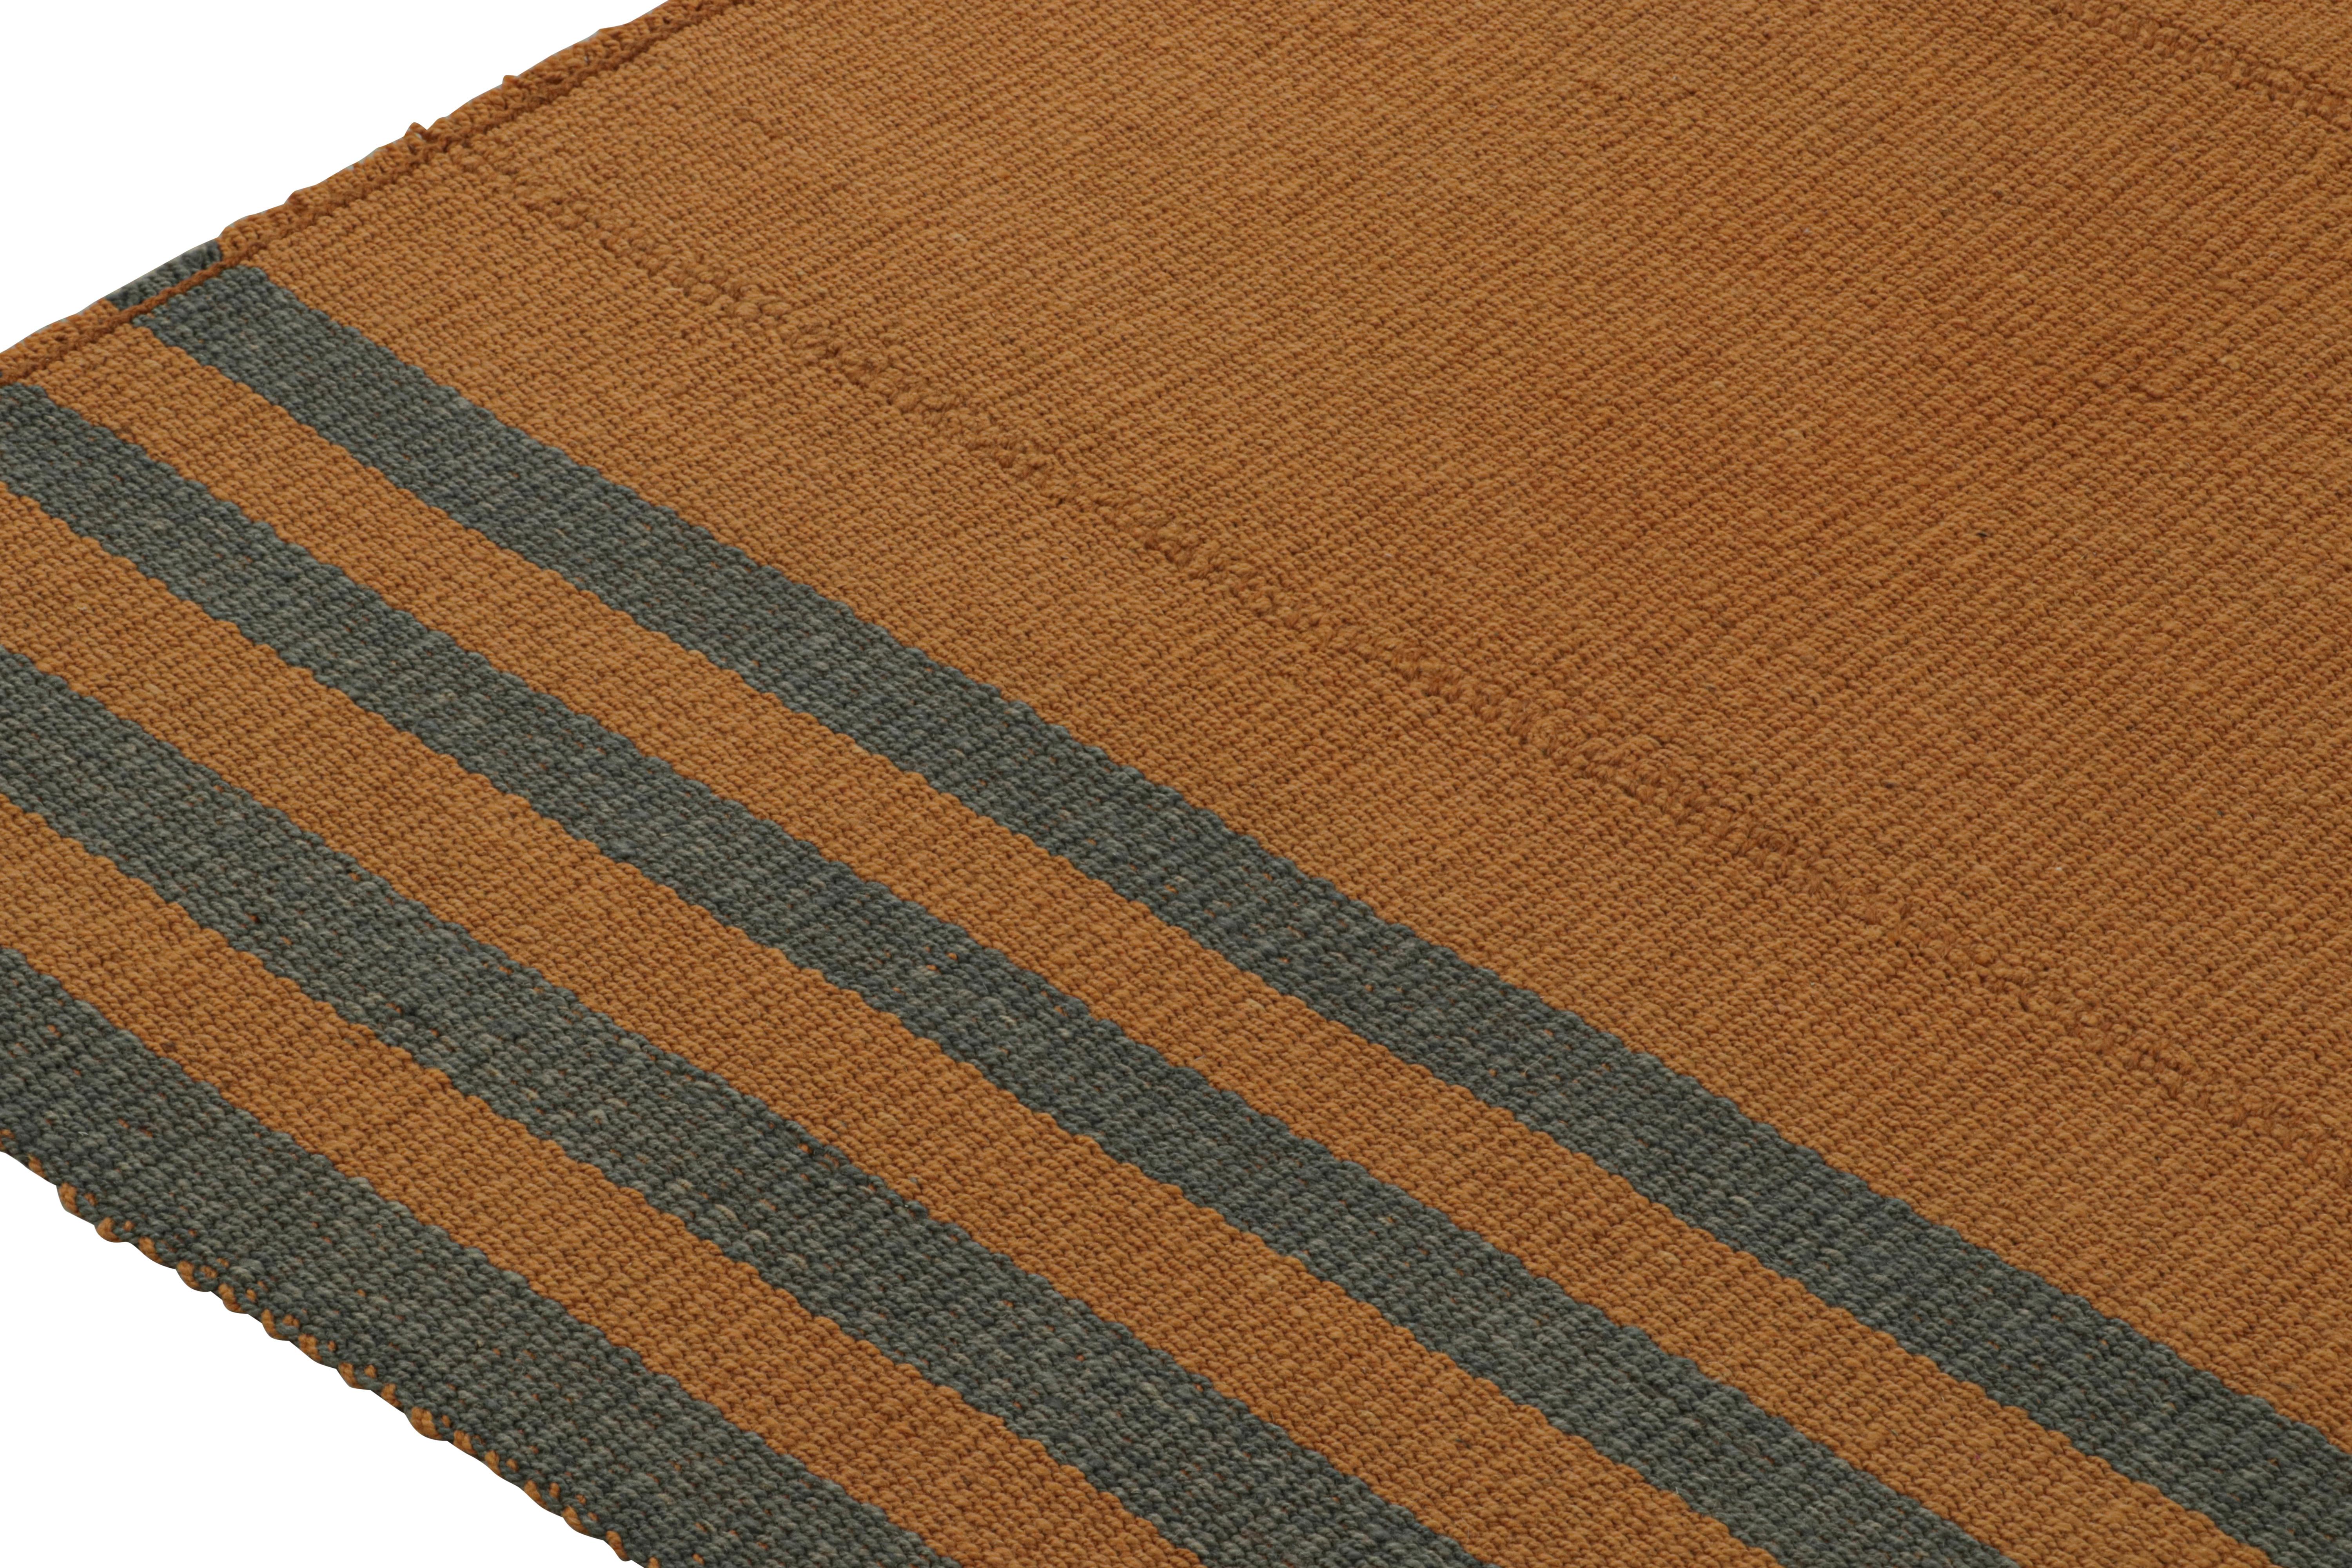 Rug & Kilim’s Textural Modern Kilim in Orange with Blue Stripes In New Condition For Sale In Long Island City, NY